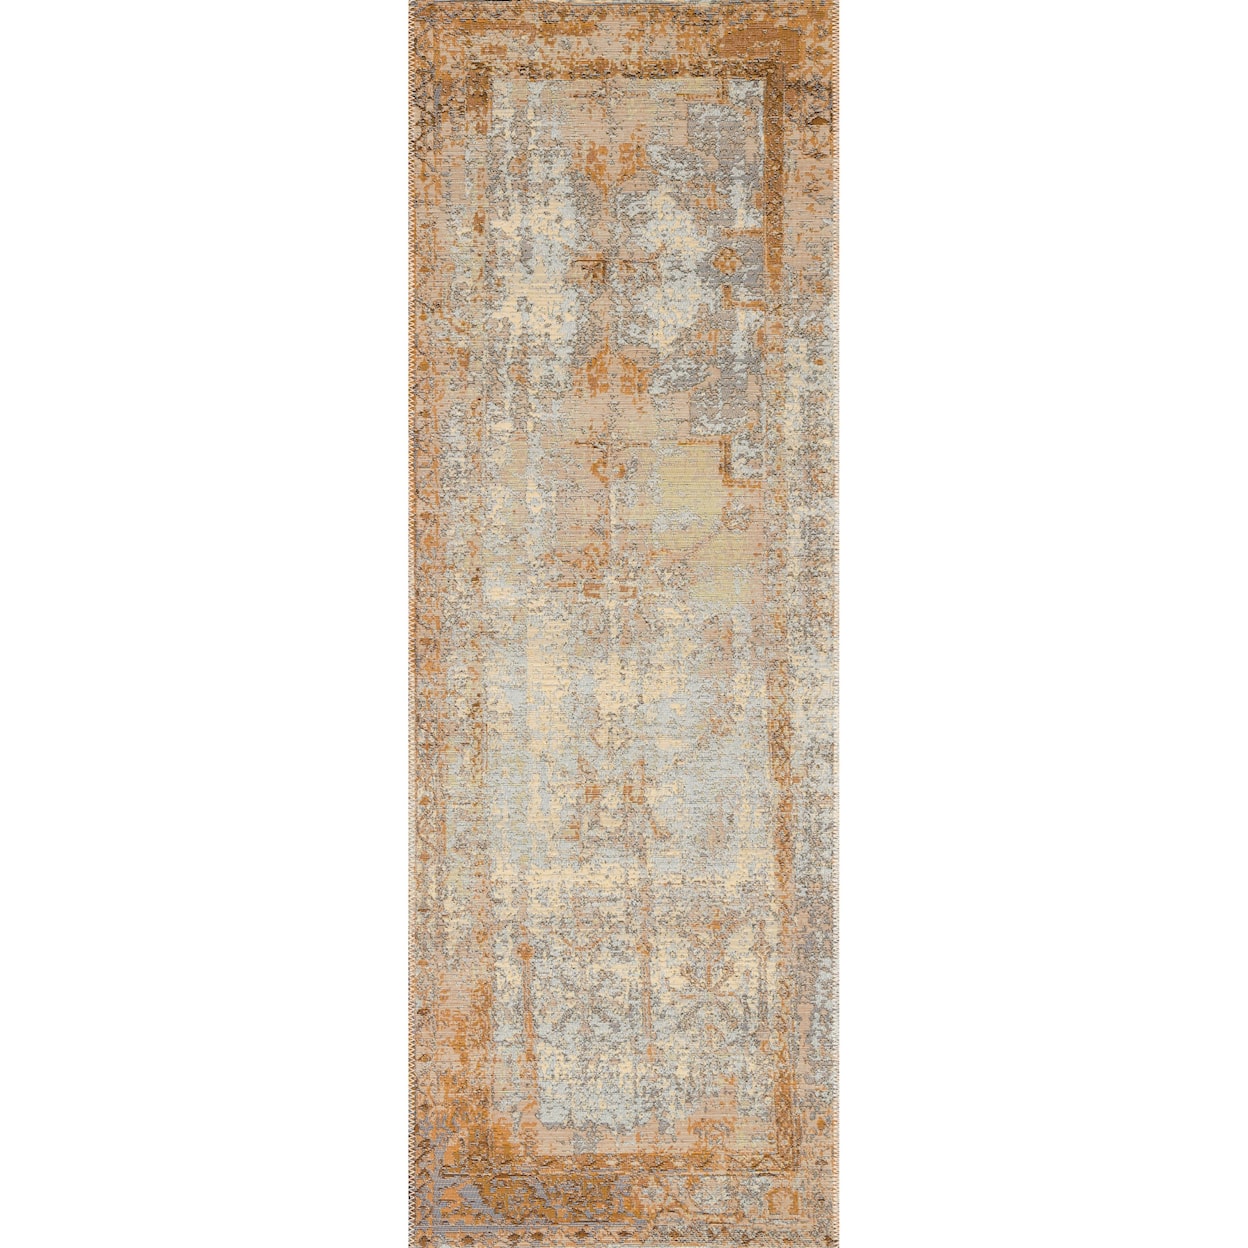 Loloi Rugs Mika 3'11" x 5'11" Ant. Ivory / Copper Rug